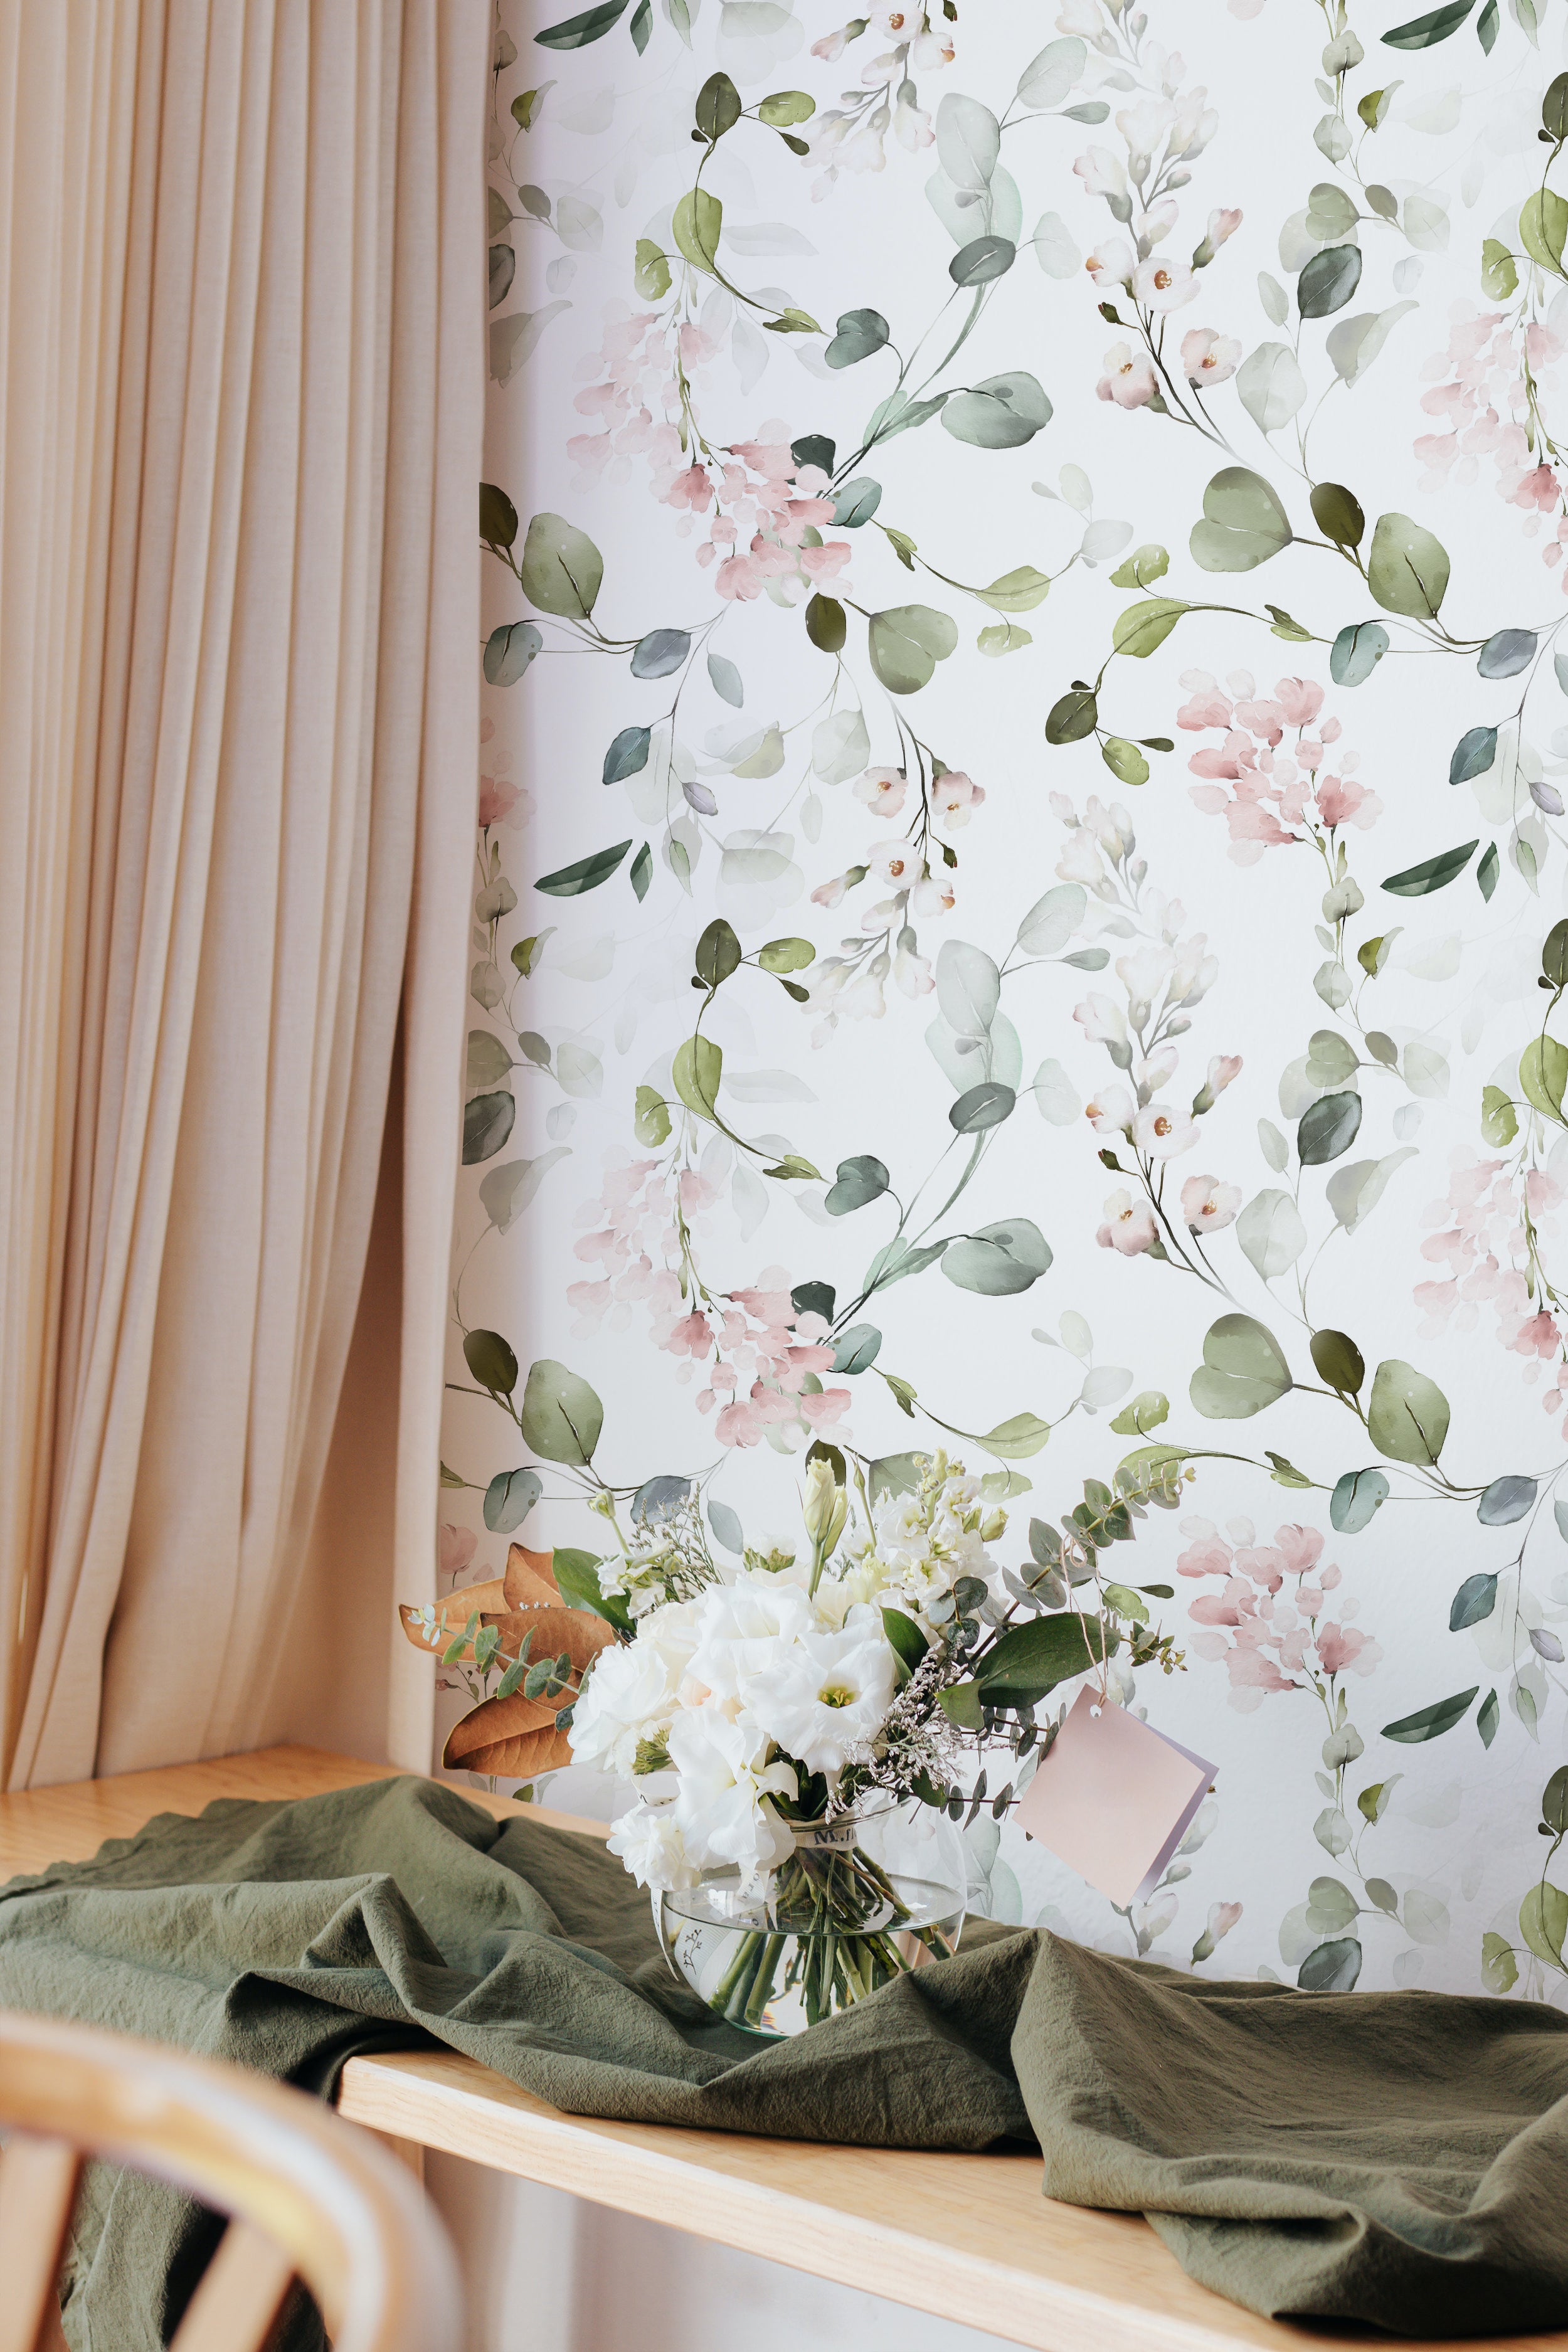 A corner of a bright room showcasing the Pink Floral & Herbs Wallpaper, paired with a wooden table dressed with a sage green throw and a bouquet of white flowers. The graceful floral pattern exudes a calm and sophisticated atmosphere.